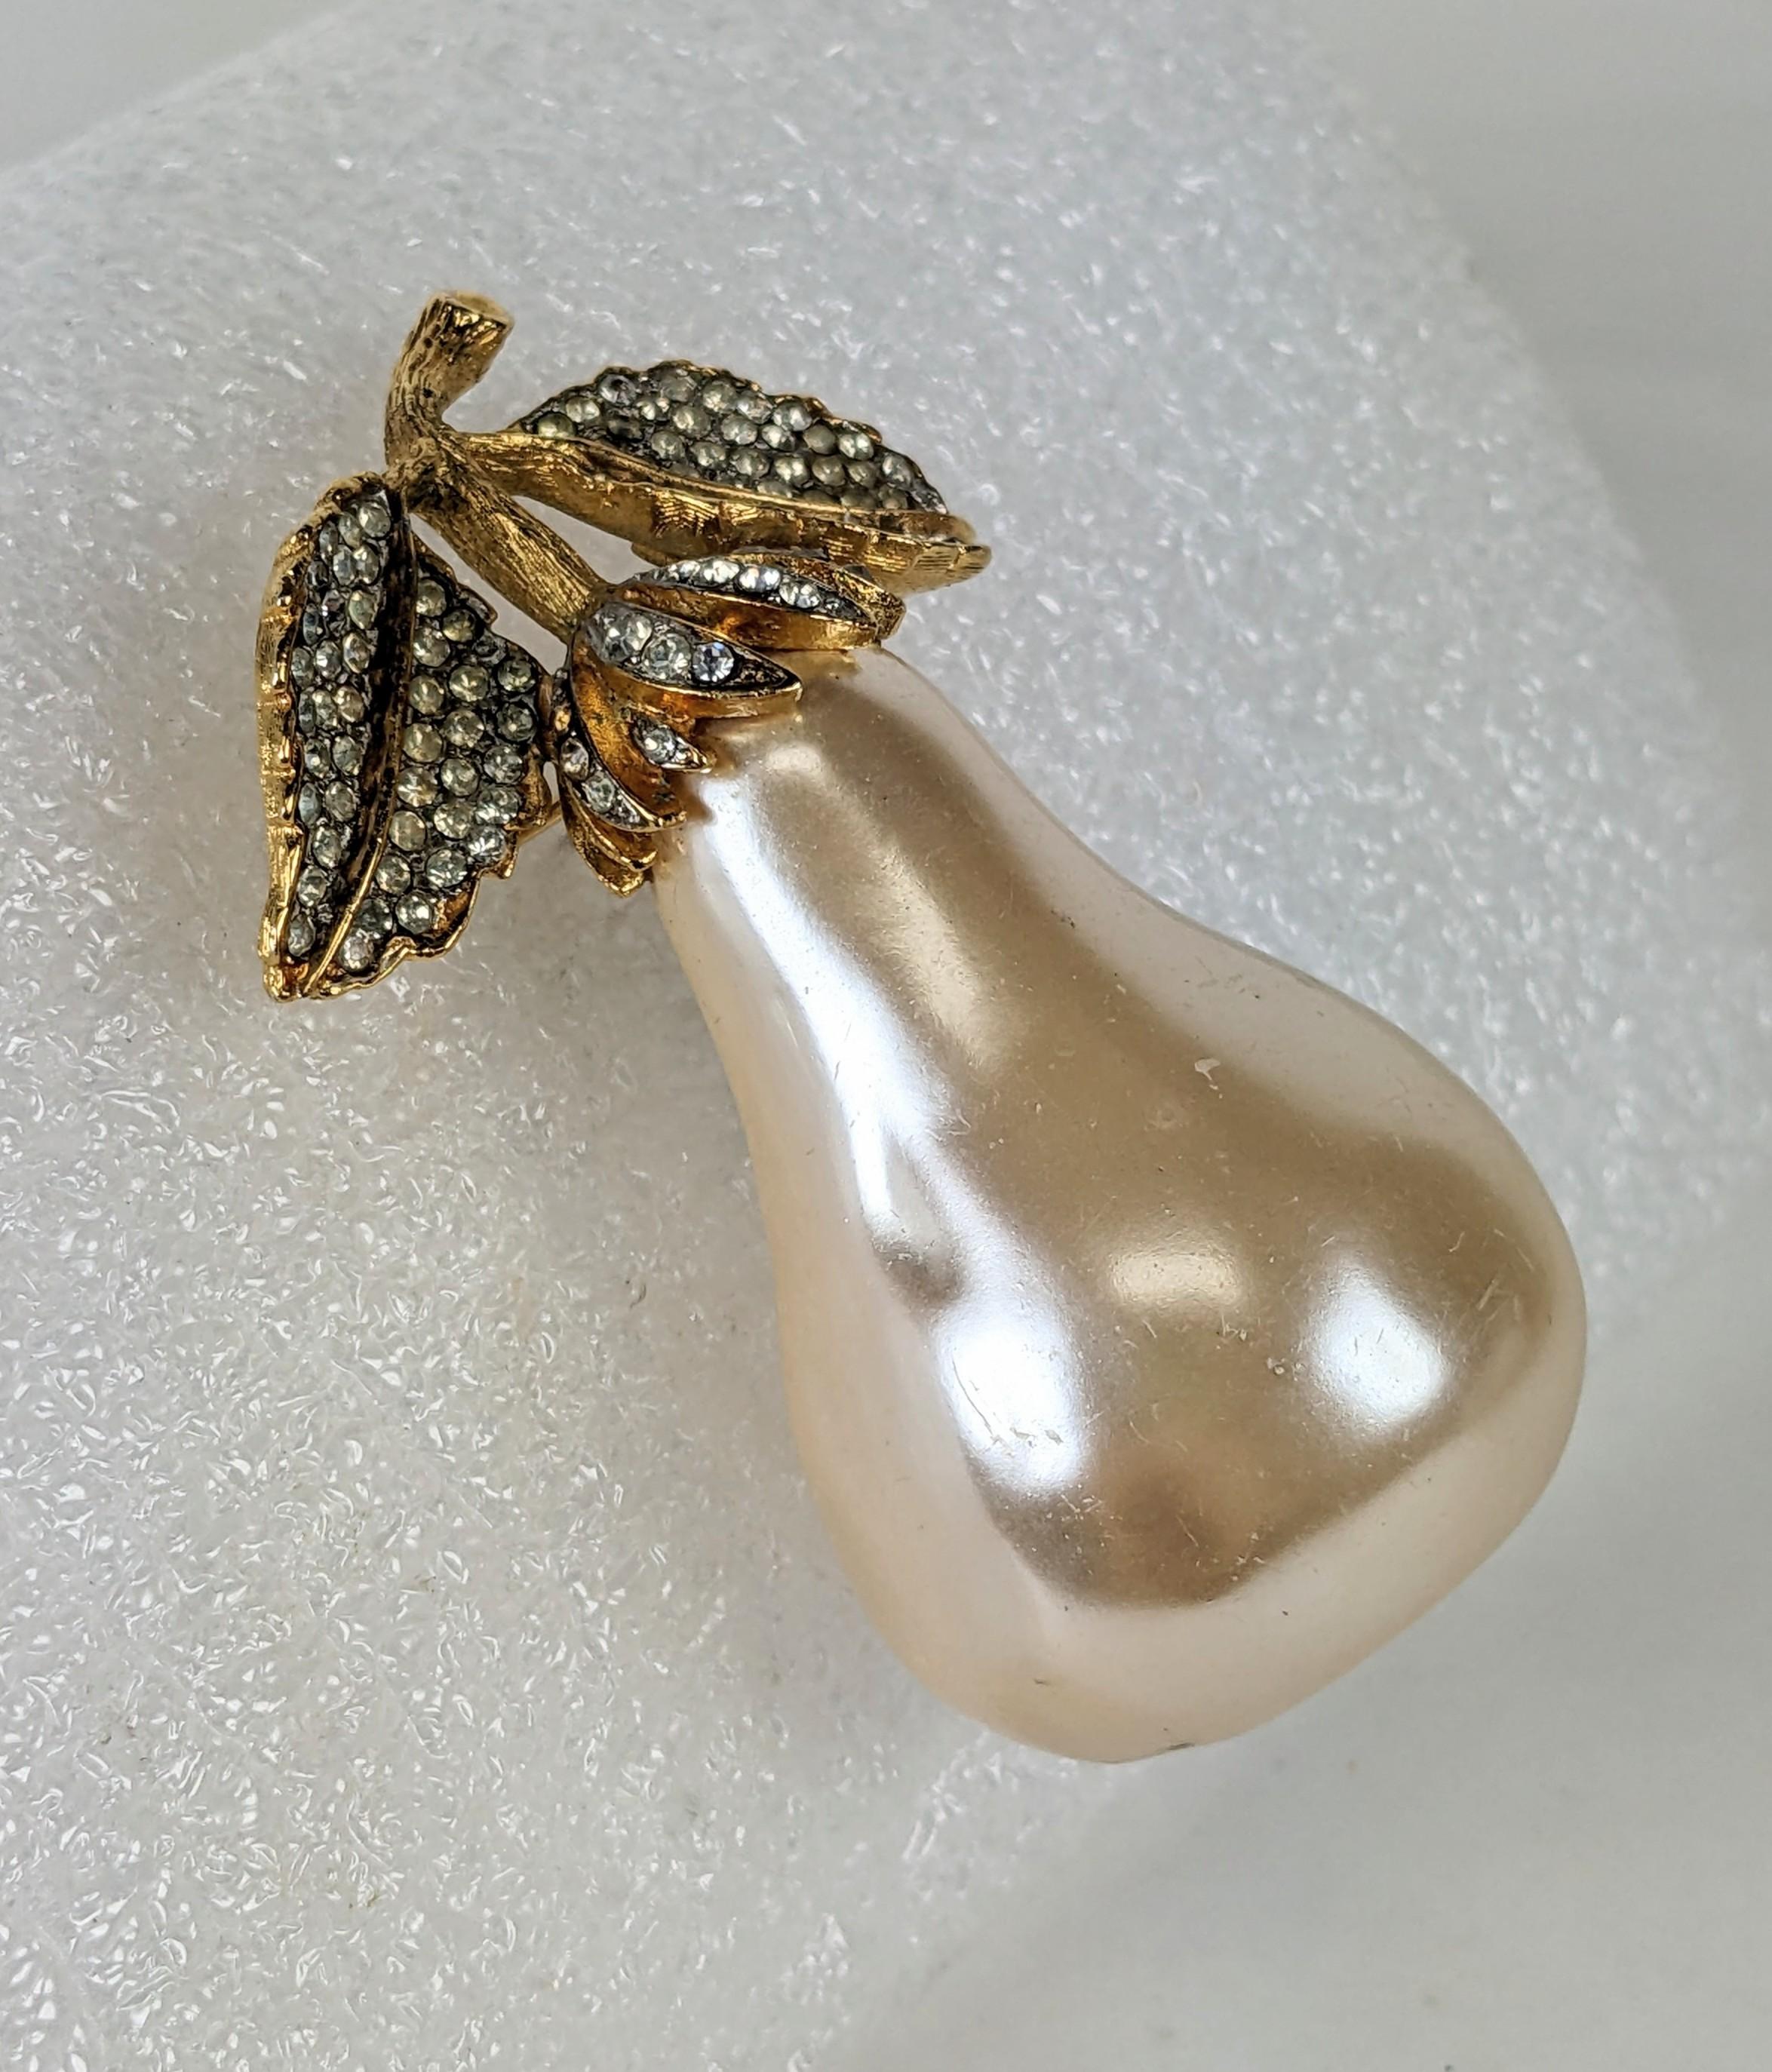 Kenneth Jay Lane Massive Pearl Pear Brooch from the 1980's. A large faux 3D pearl 